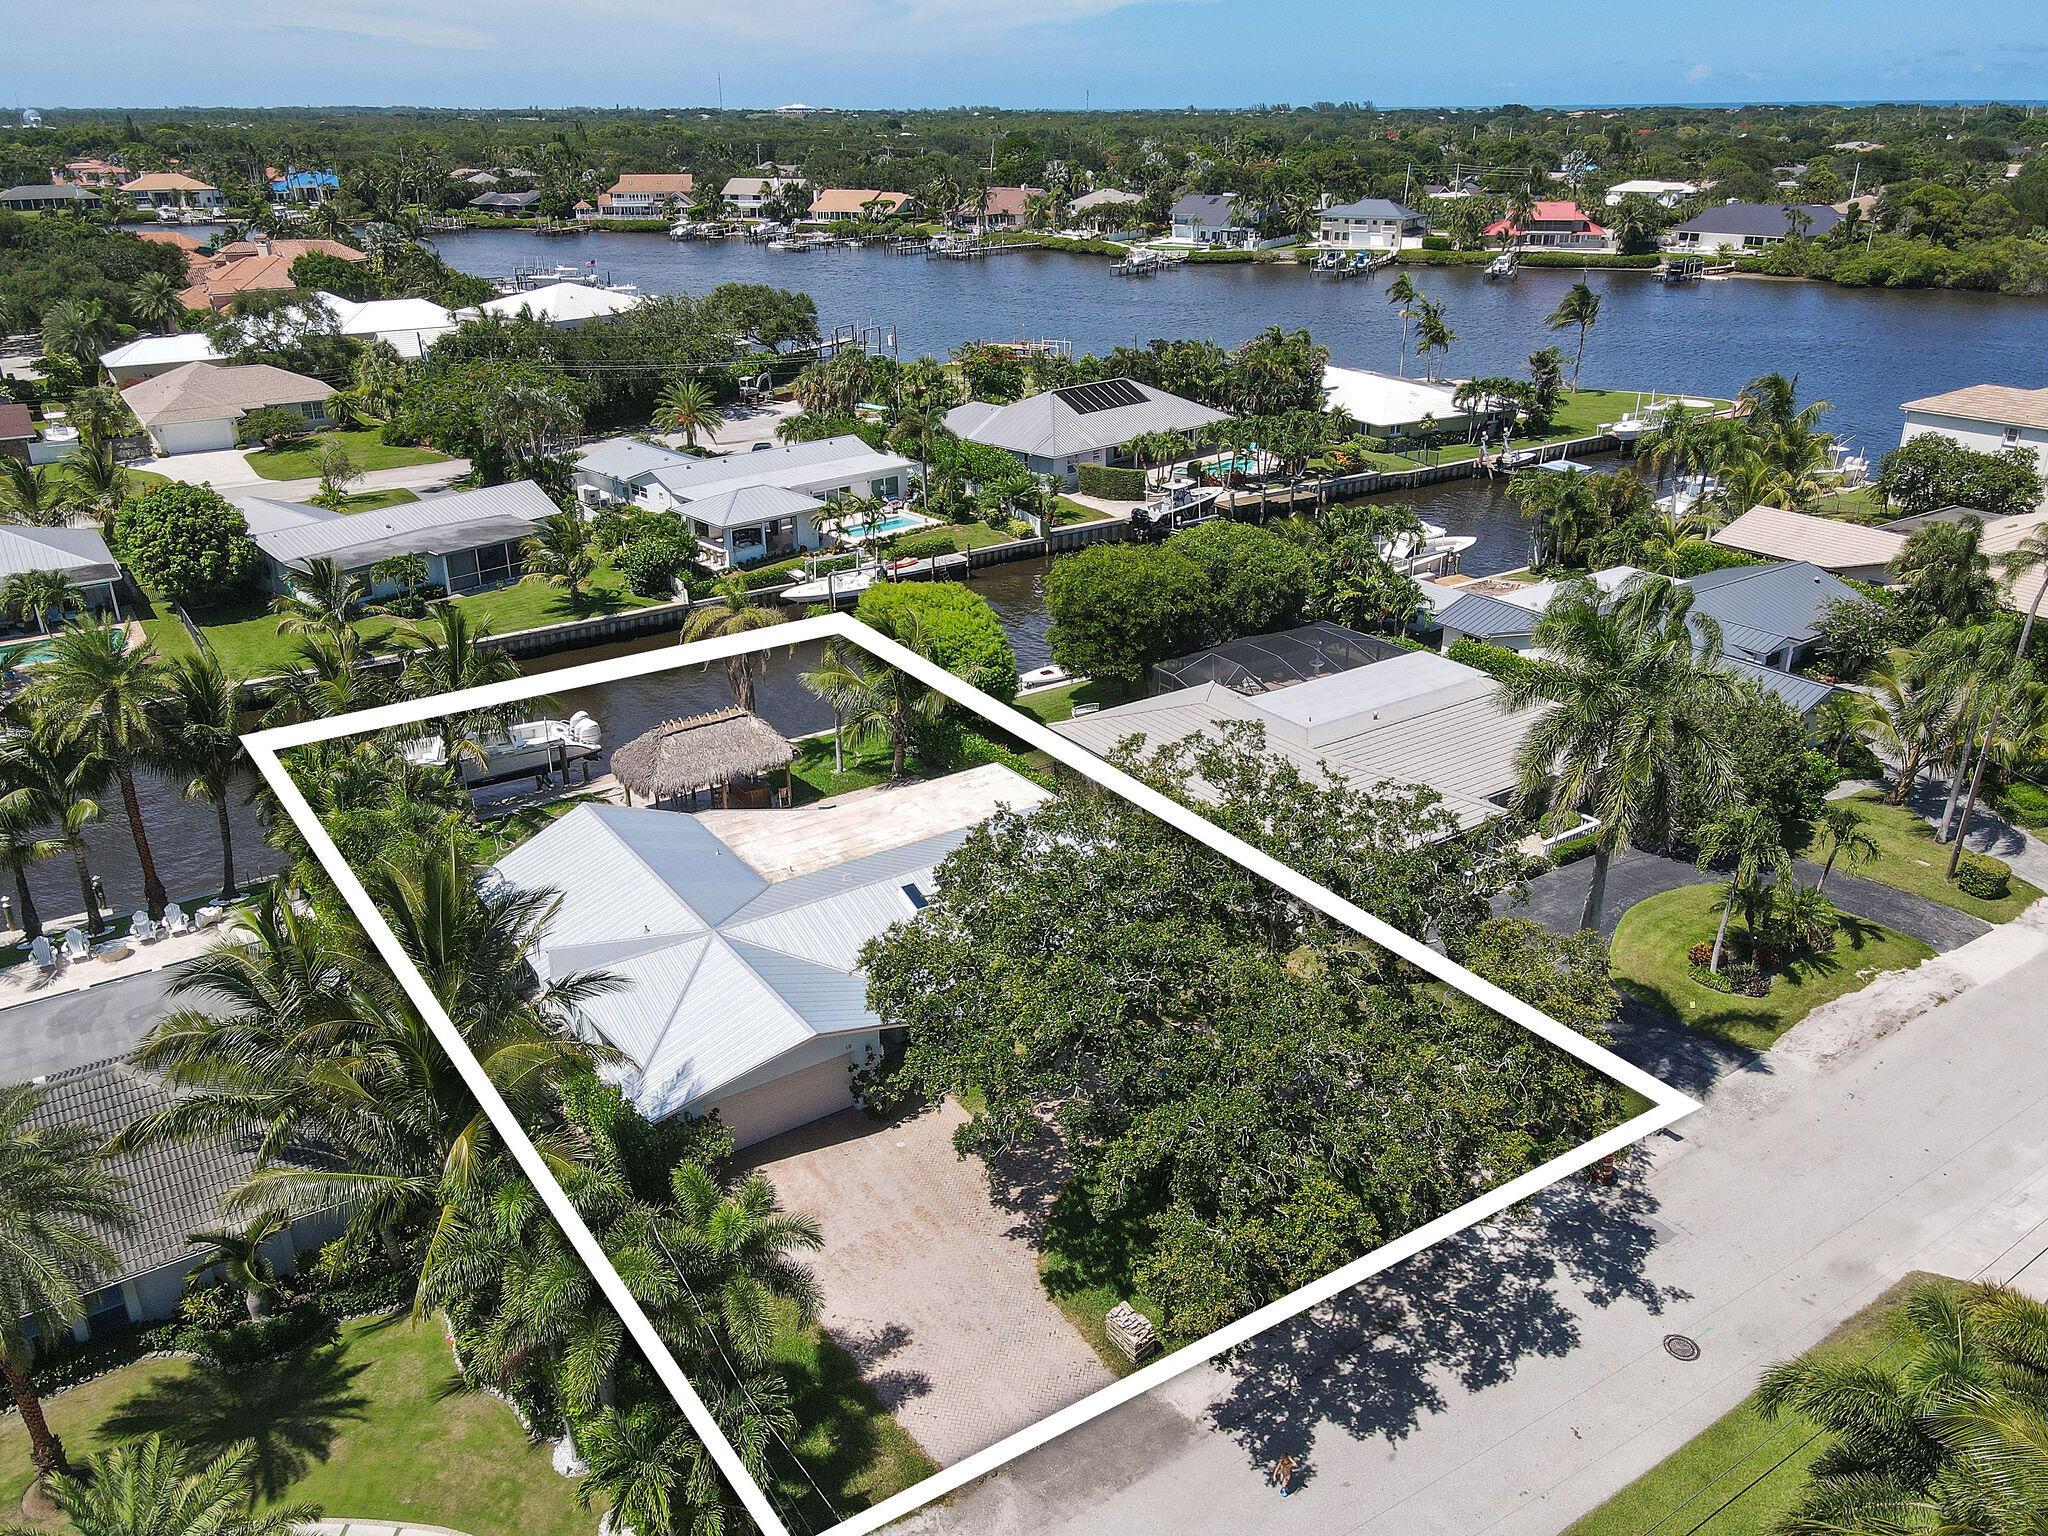 Nestled in the exclusive enclave of Country Club Point in Tequesta, this waterfront home presents an unparalleled opportunity for customization and luxury living. Inside, the home's interior is a blank canvas awaiting personalization. With the structure fully gutted and under construction, the potential is limitless for creating a bespoke residence tailored to the new owner's preferences and lifestyle. Situated on a beautiful waterfront lot with 85 ft of waterfrontage, the home offers views of the serene waterways that characterize Tequesta. The property features a private dock, pool area, and tiki hut, perfect for relaxing under the Florida sun or entertaining guests. Enjoy proximity to world-class golf courses, fine dining establishments, and boutique shopping, ensuring a lifestyle of both relaxation and convenience. For those seeking a waterfront sanctuary in one of Florida's most coveted locations, this property offers a rare opportunity to customize your dream home from the ground up.